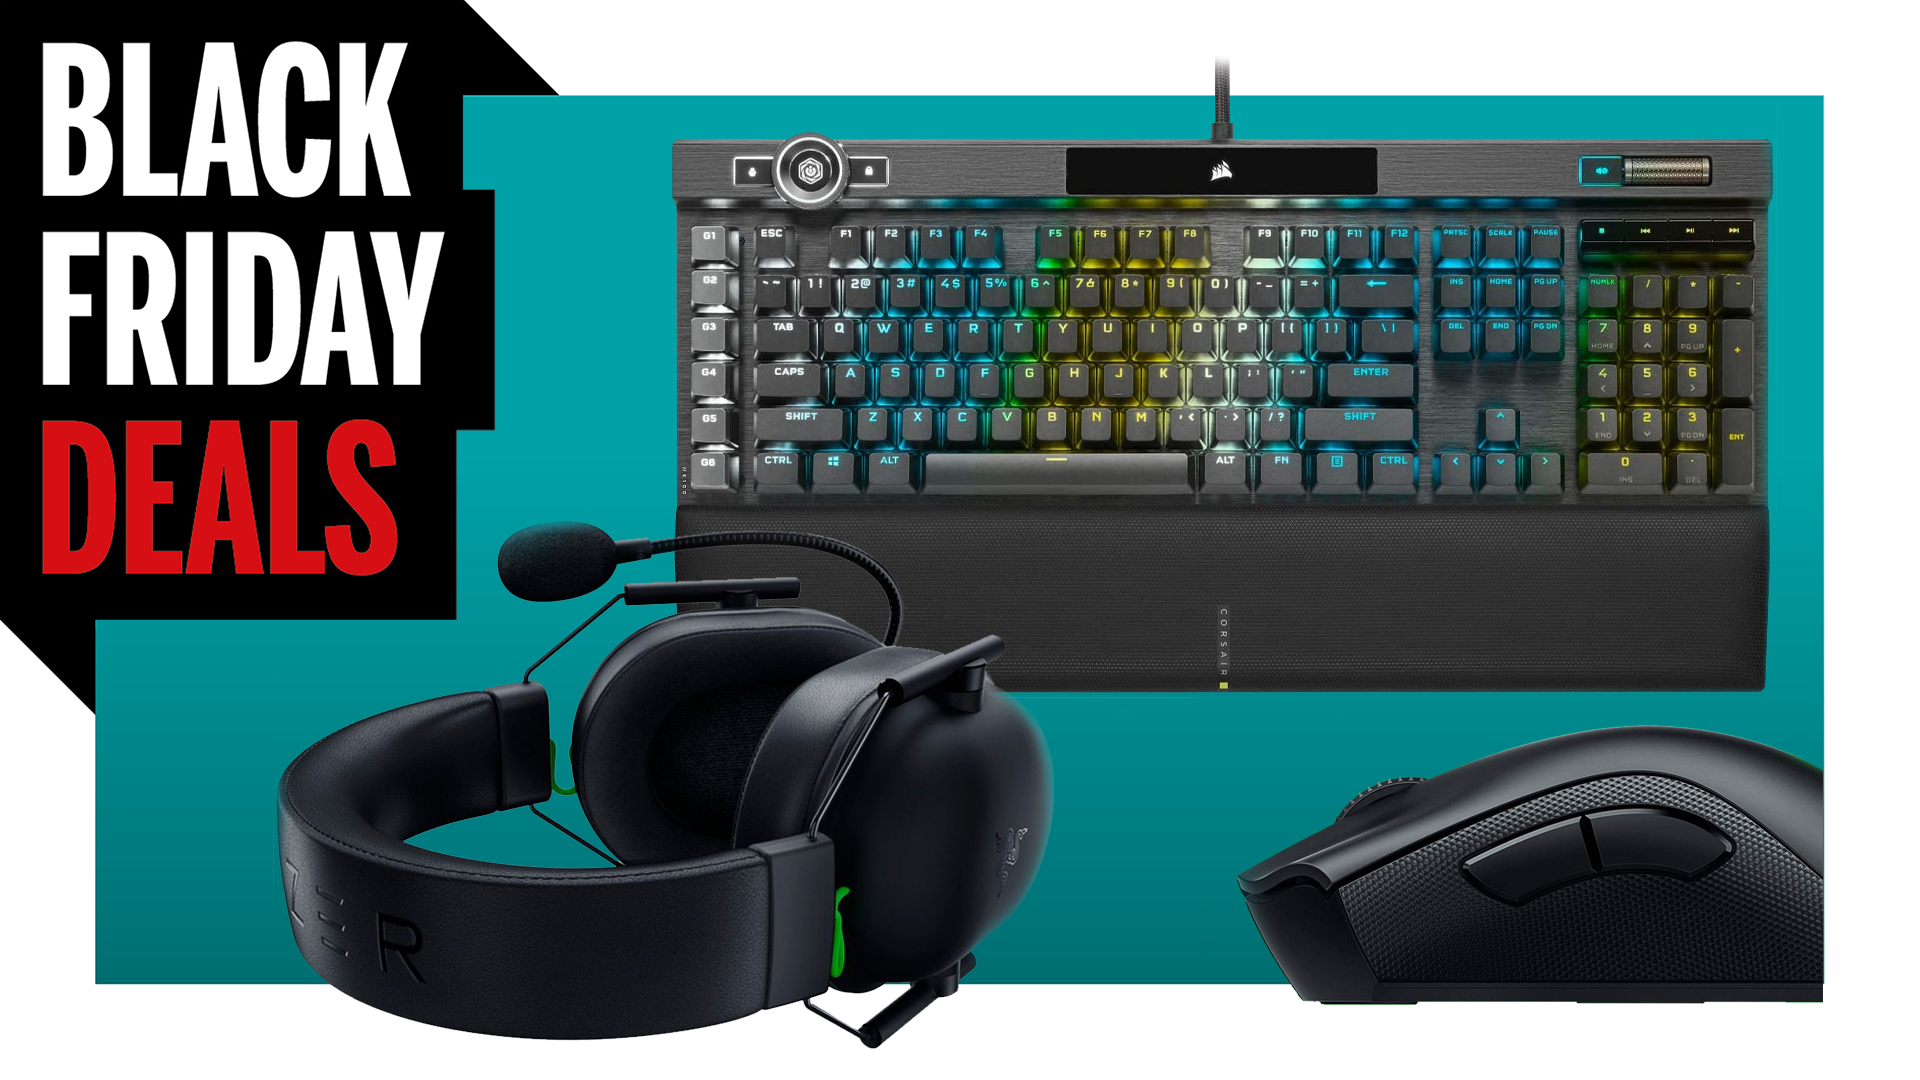  Forget other Black Friday deals on mice, keyboards & headsets: this is the perfect trifecta 